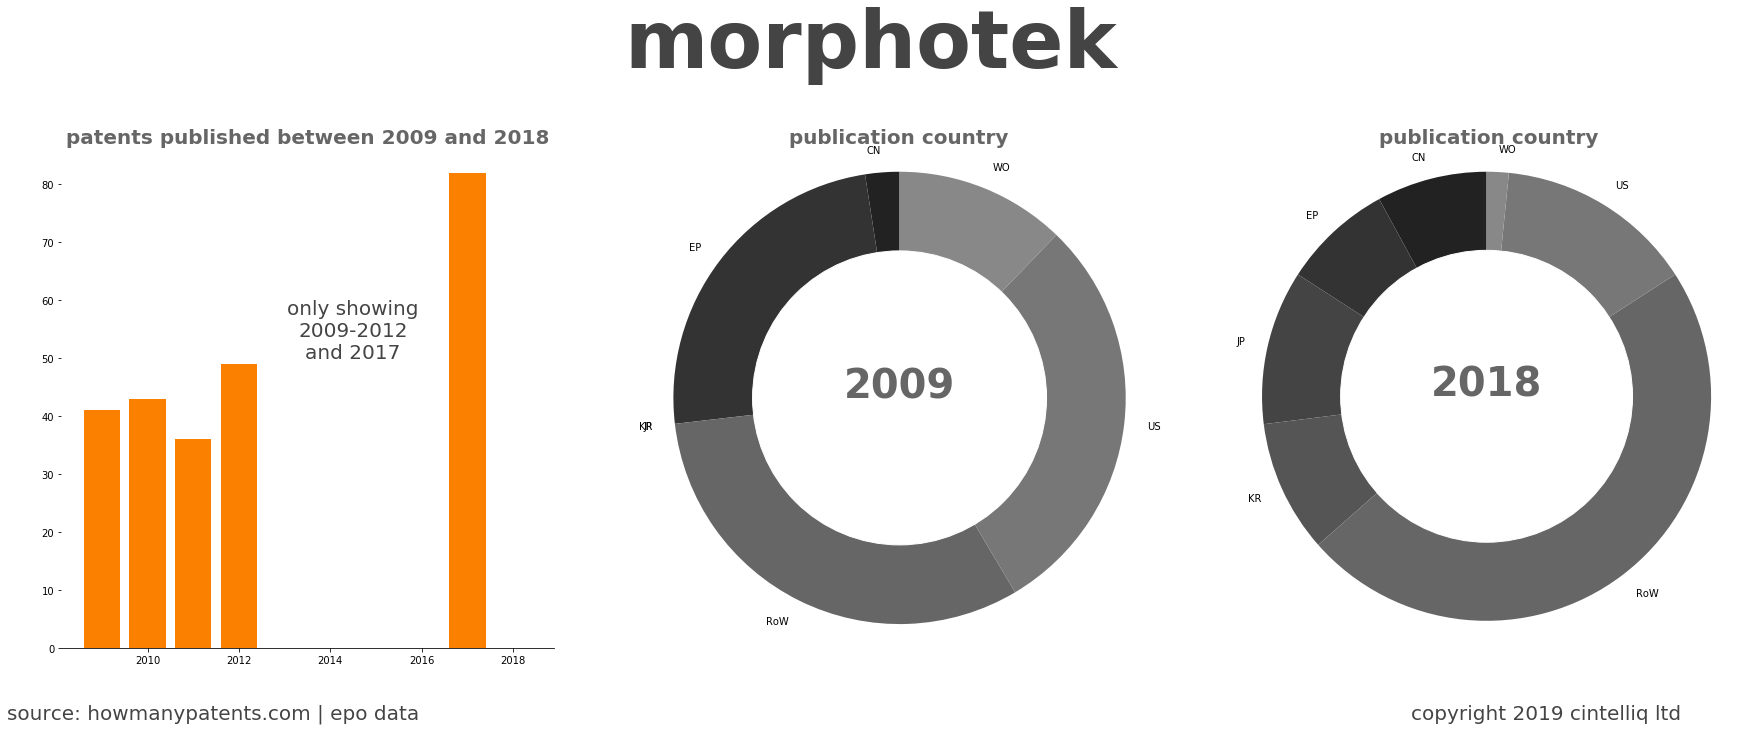 summary of patents for Morphotek